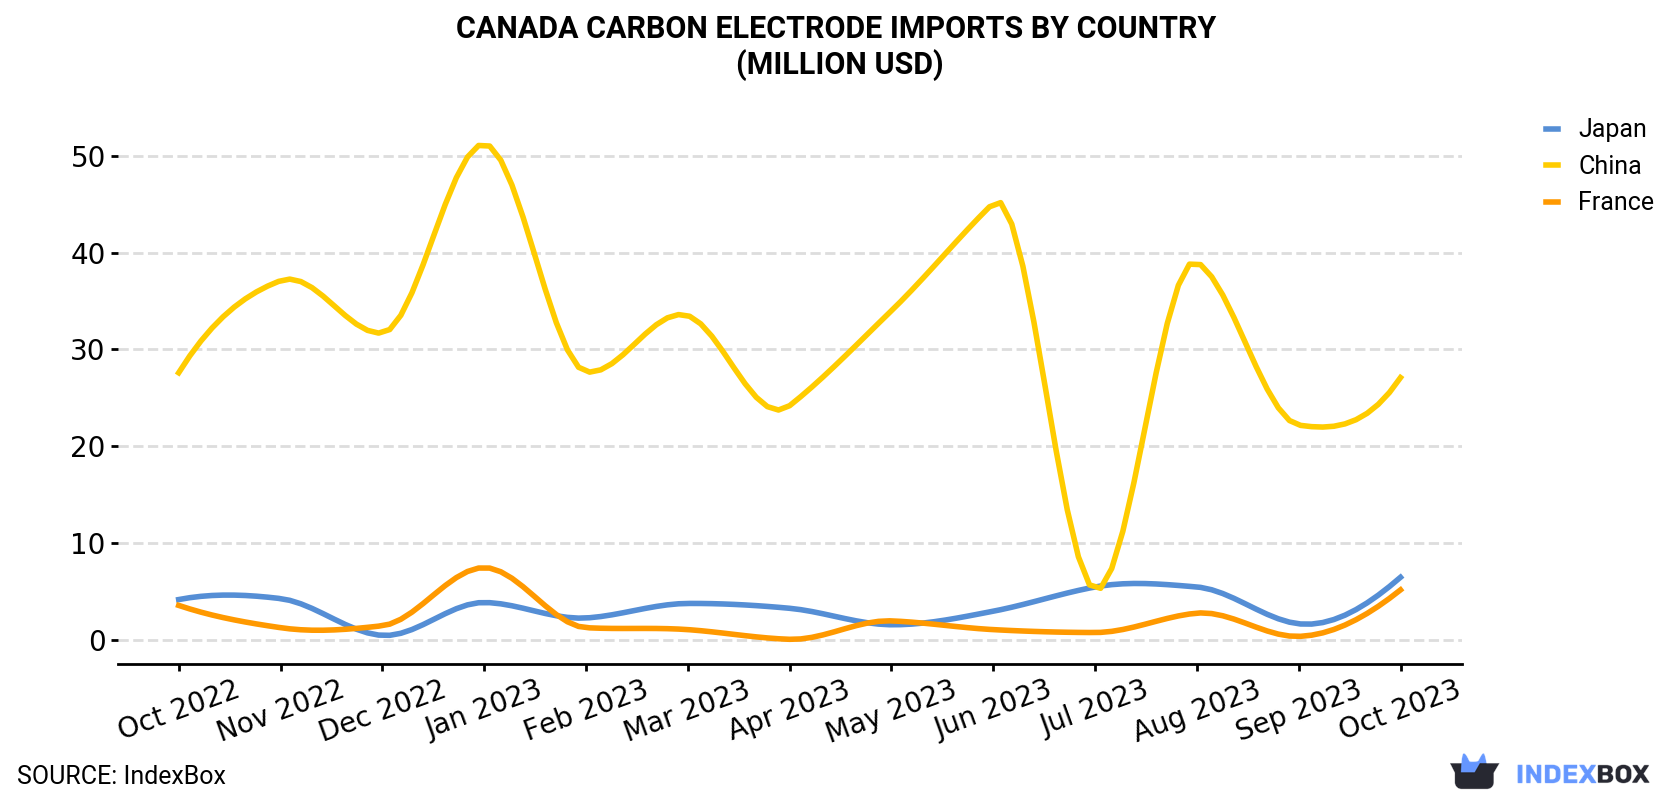 Canada Carbon Electrode Imports By Country (Million USD)